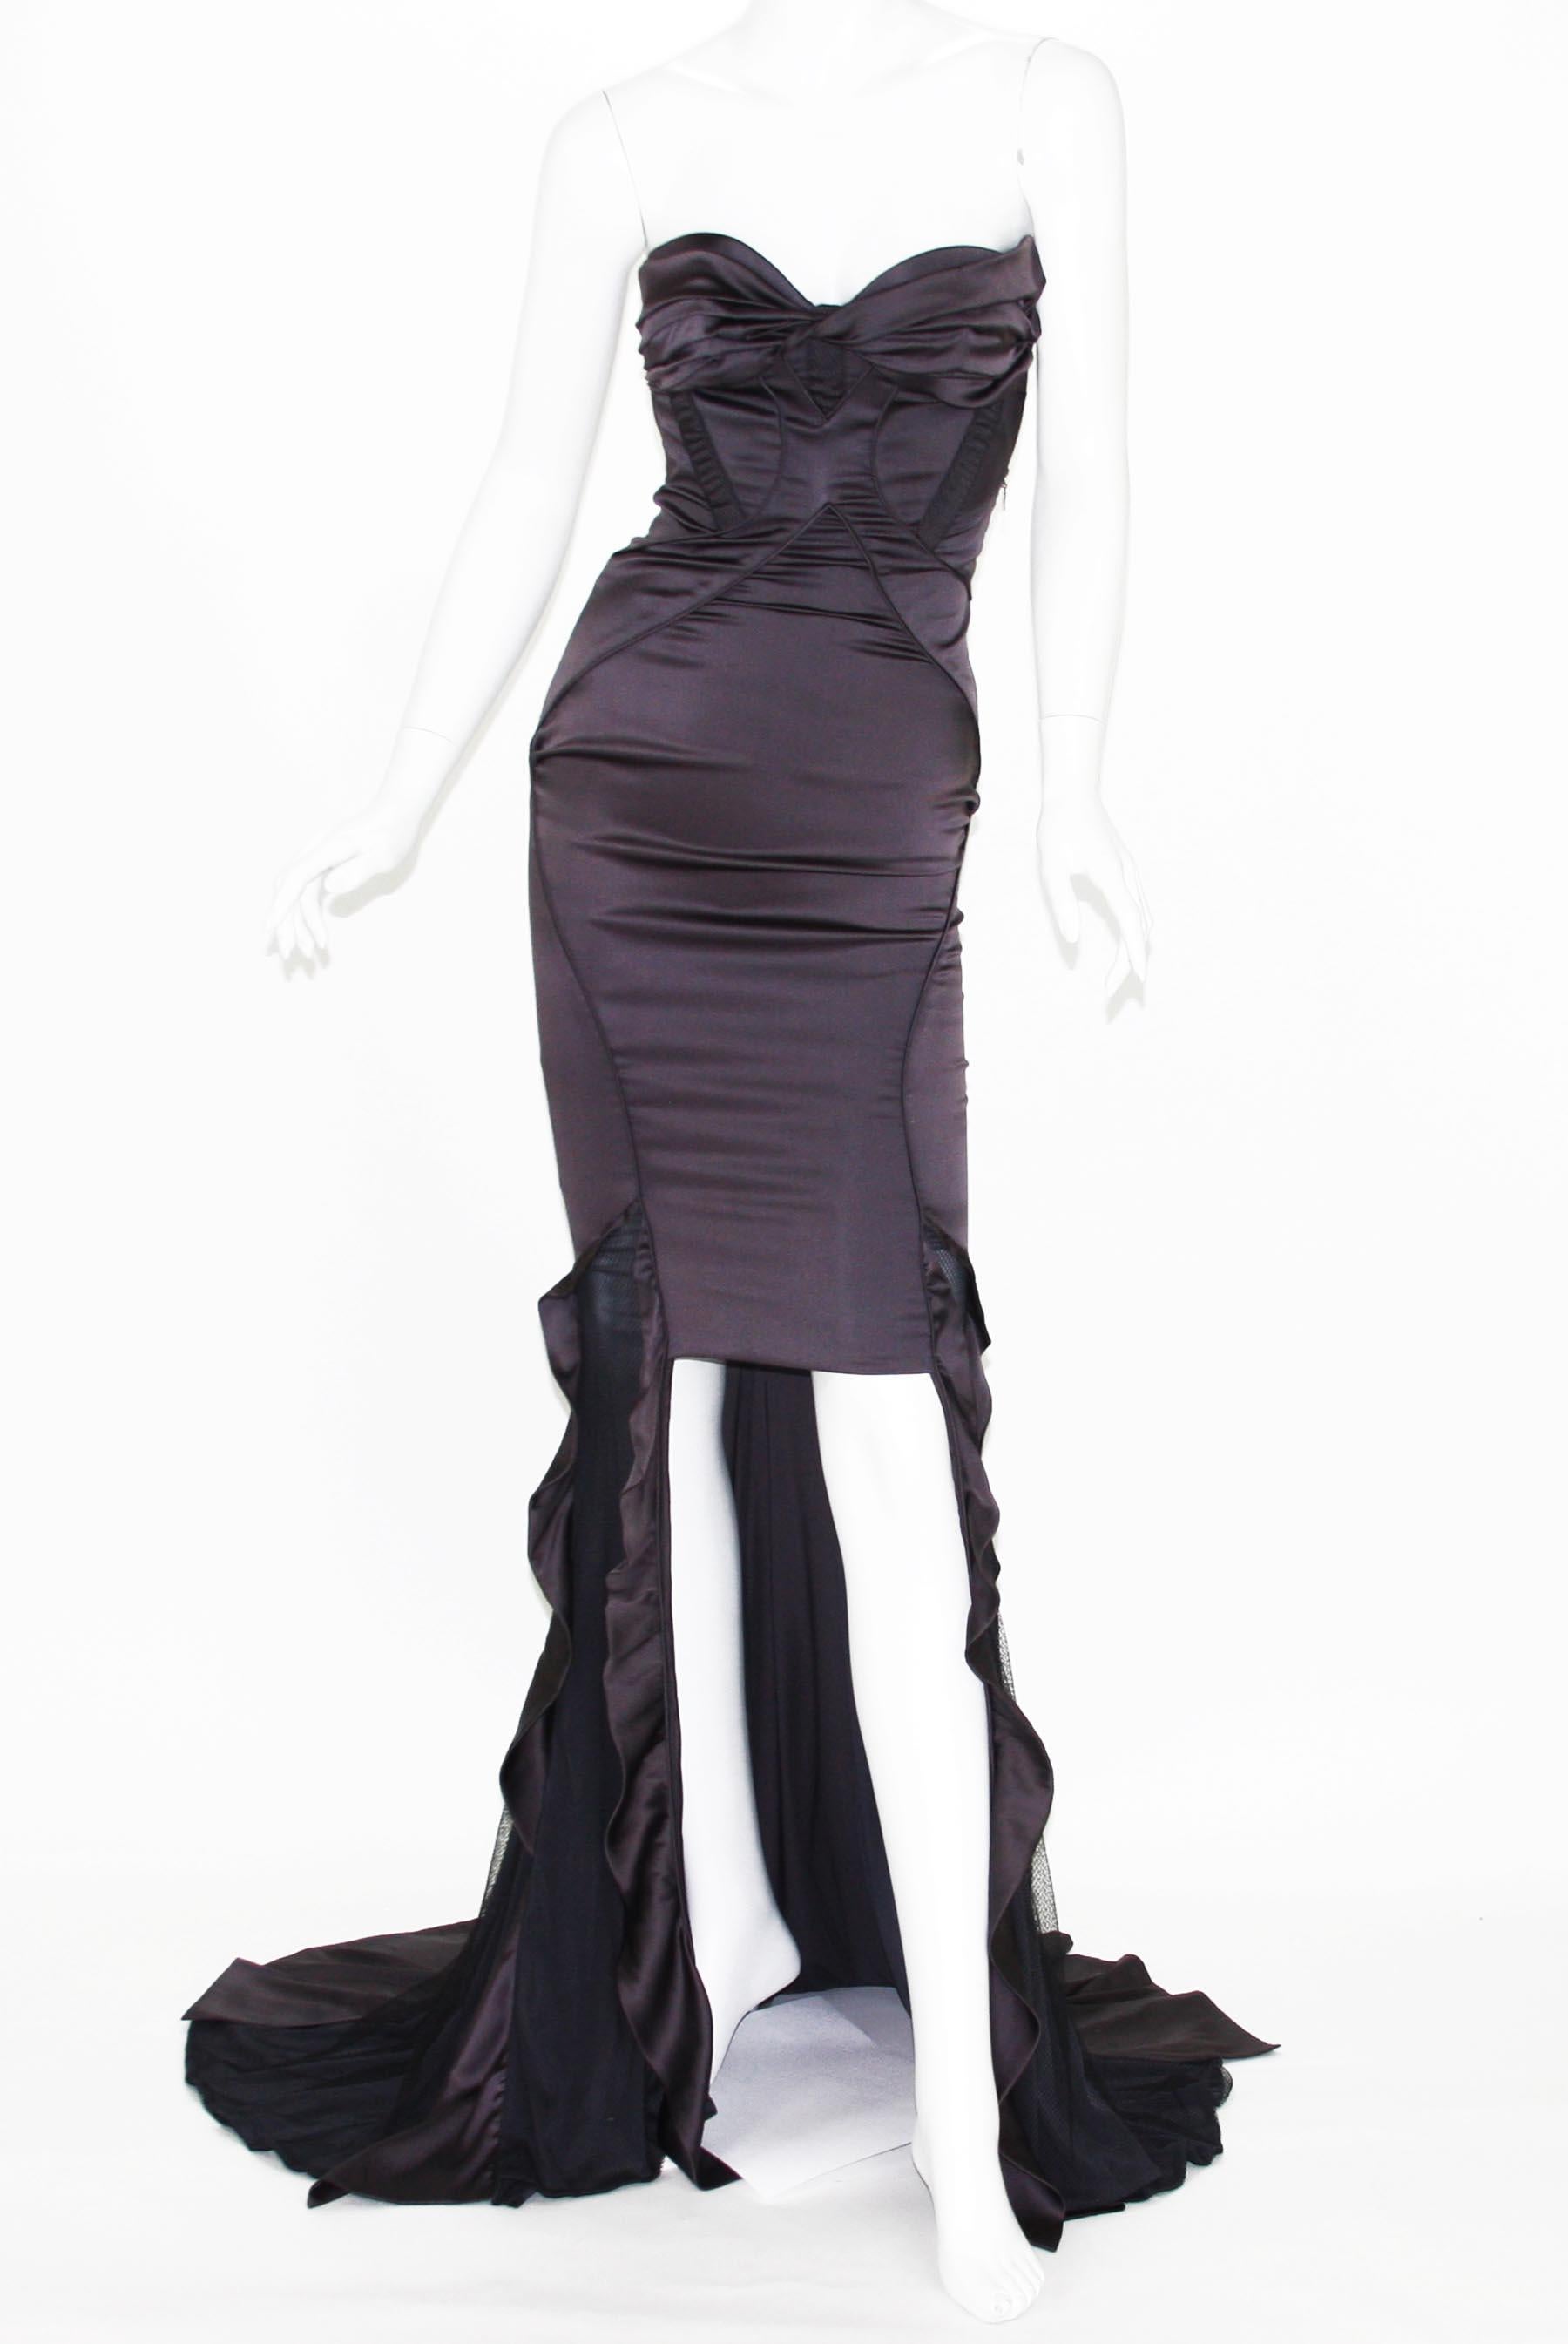 New Gucci High-Low Cut-Out Silk Dress Gown
F/W 2005 Collection
Designer size - 40 ( run small - please check measurements).
Gunmetal Brown Silk with Black Net Overlay Inserts, Cut-Out Detail, Corset Style, Strapless Neckline, Zip Closure.
68% Silk,